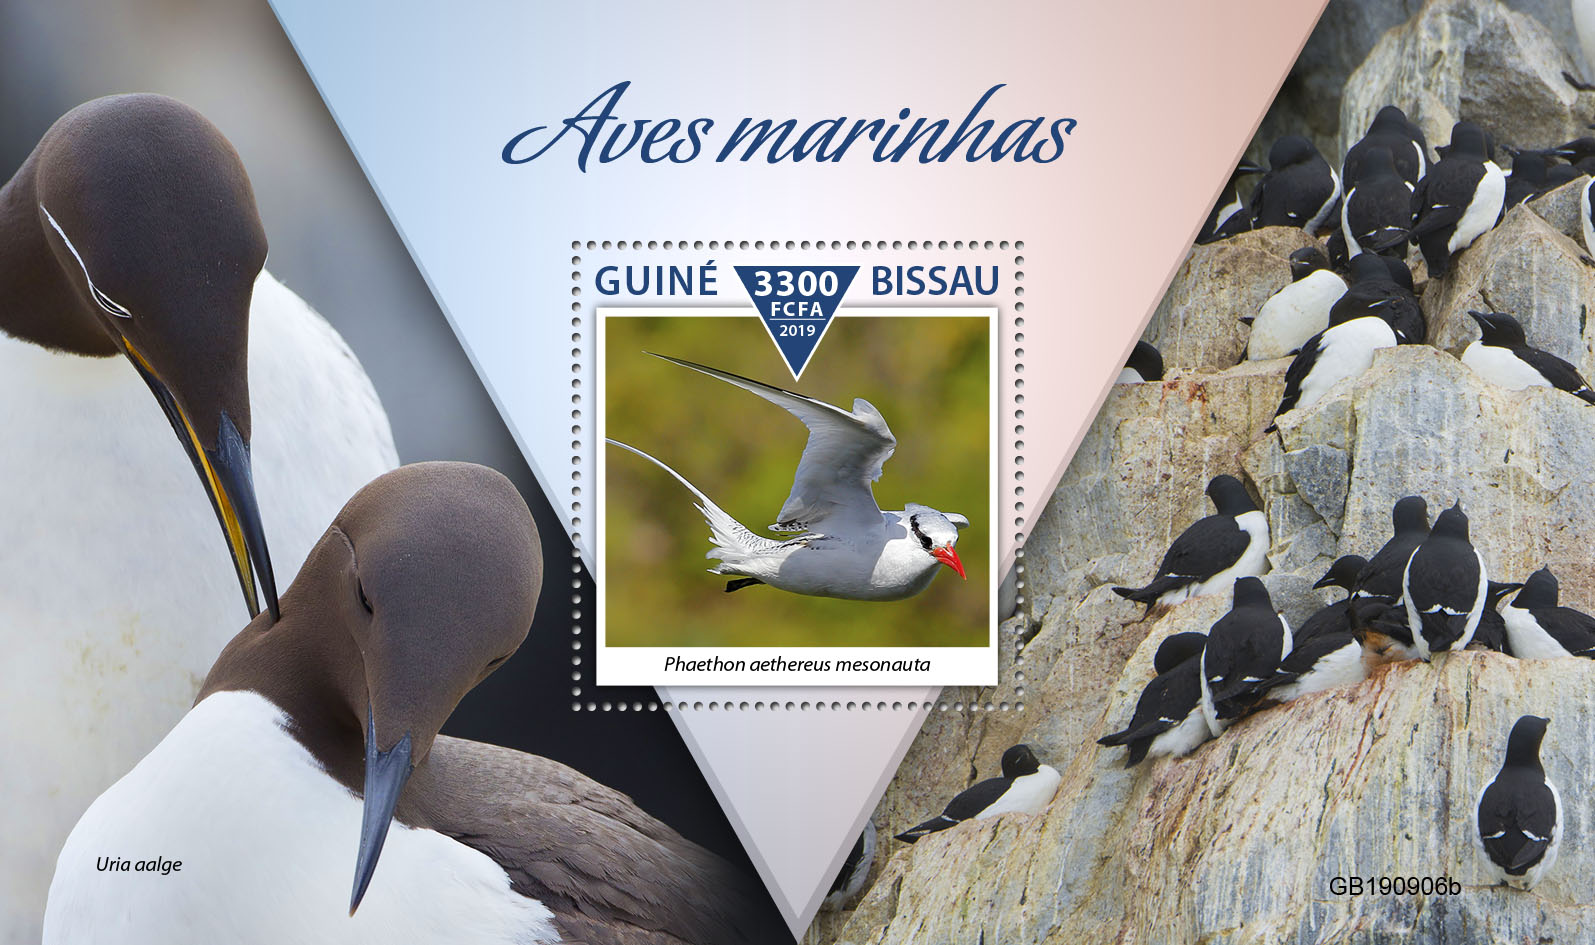 Sea birds - Issue of Guinée-Bissau postage stamps